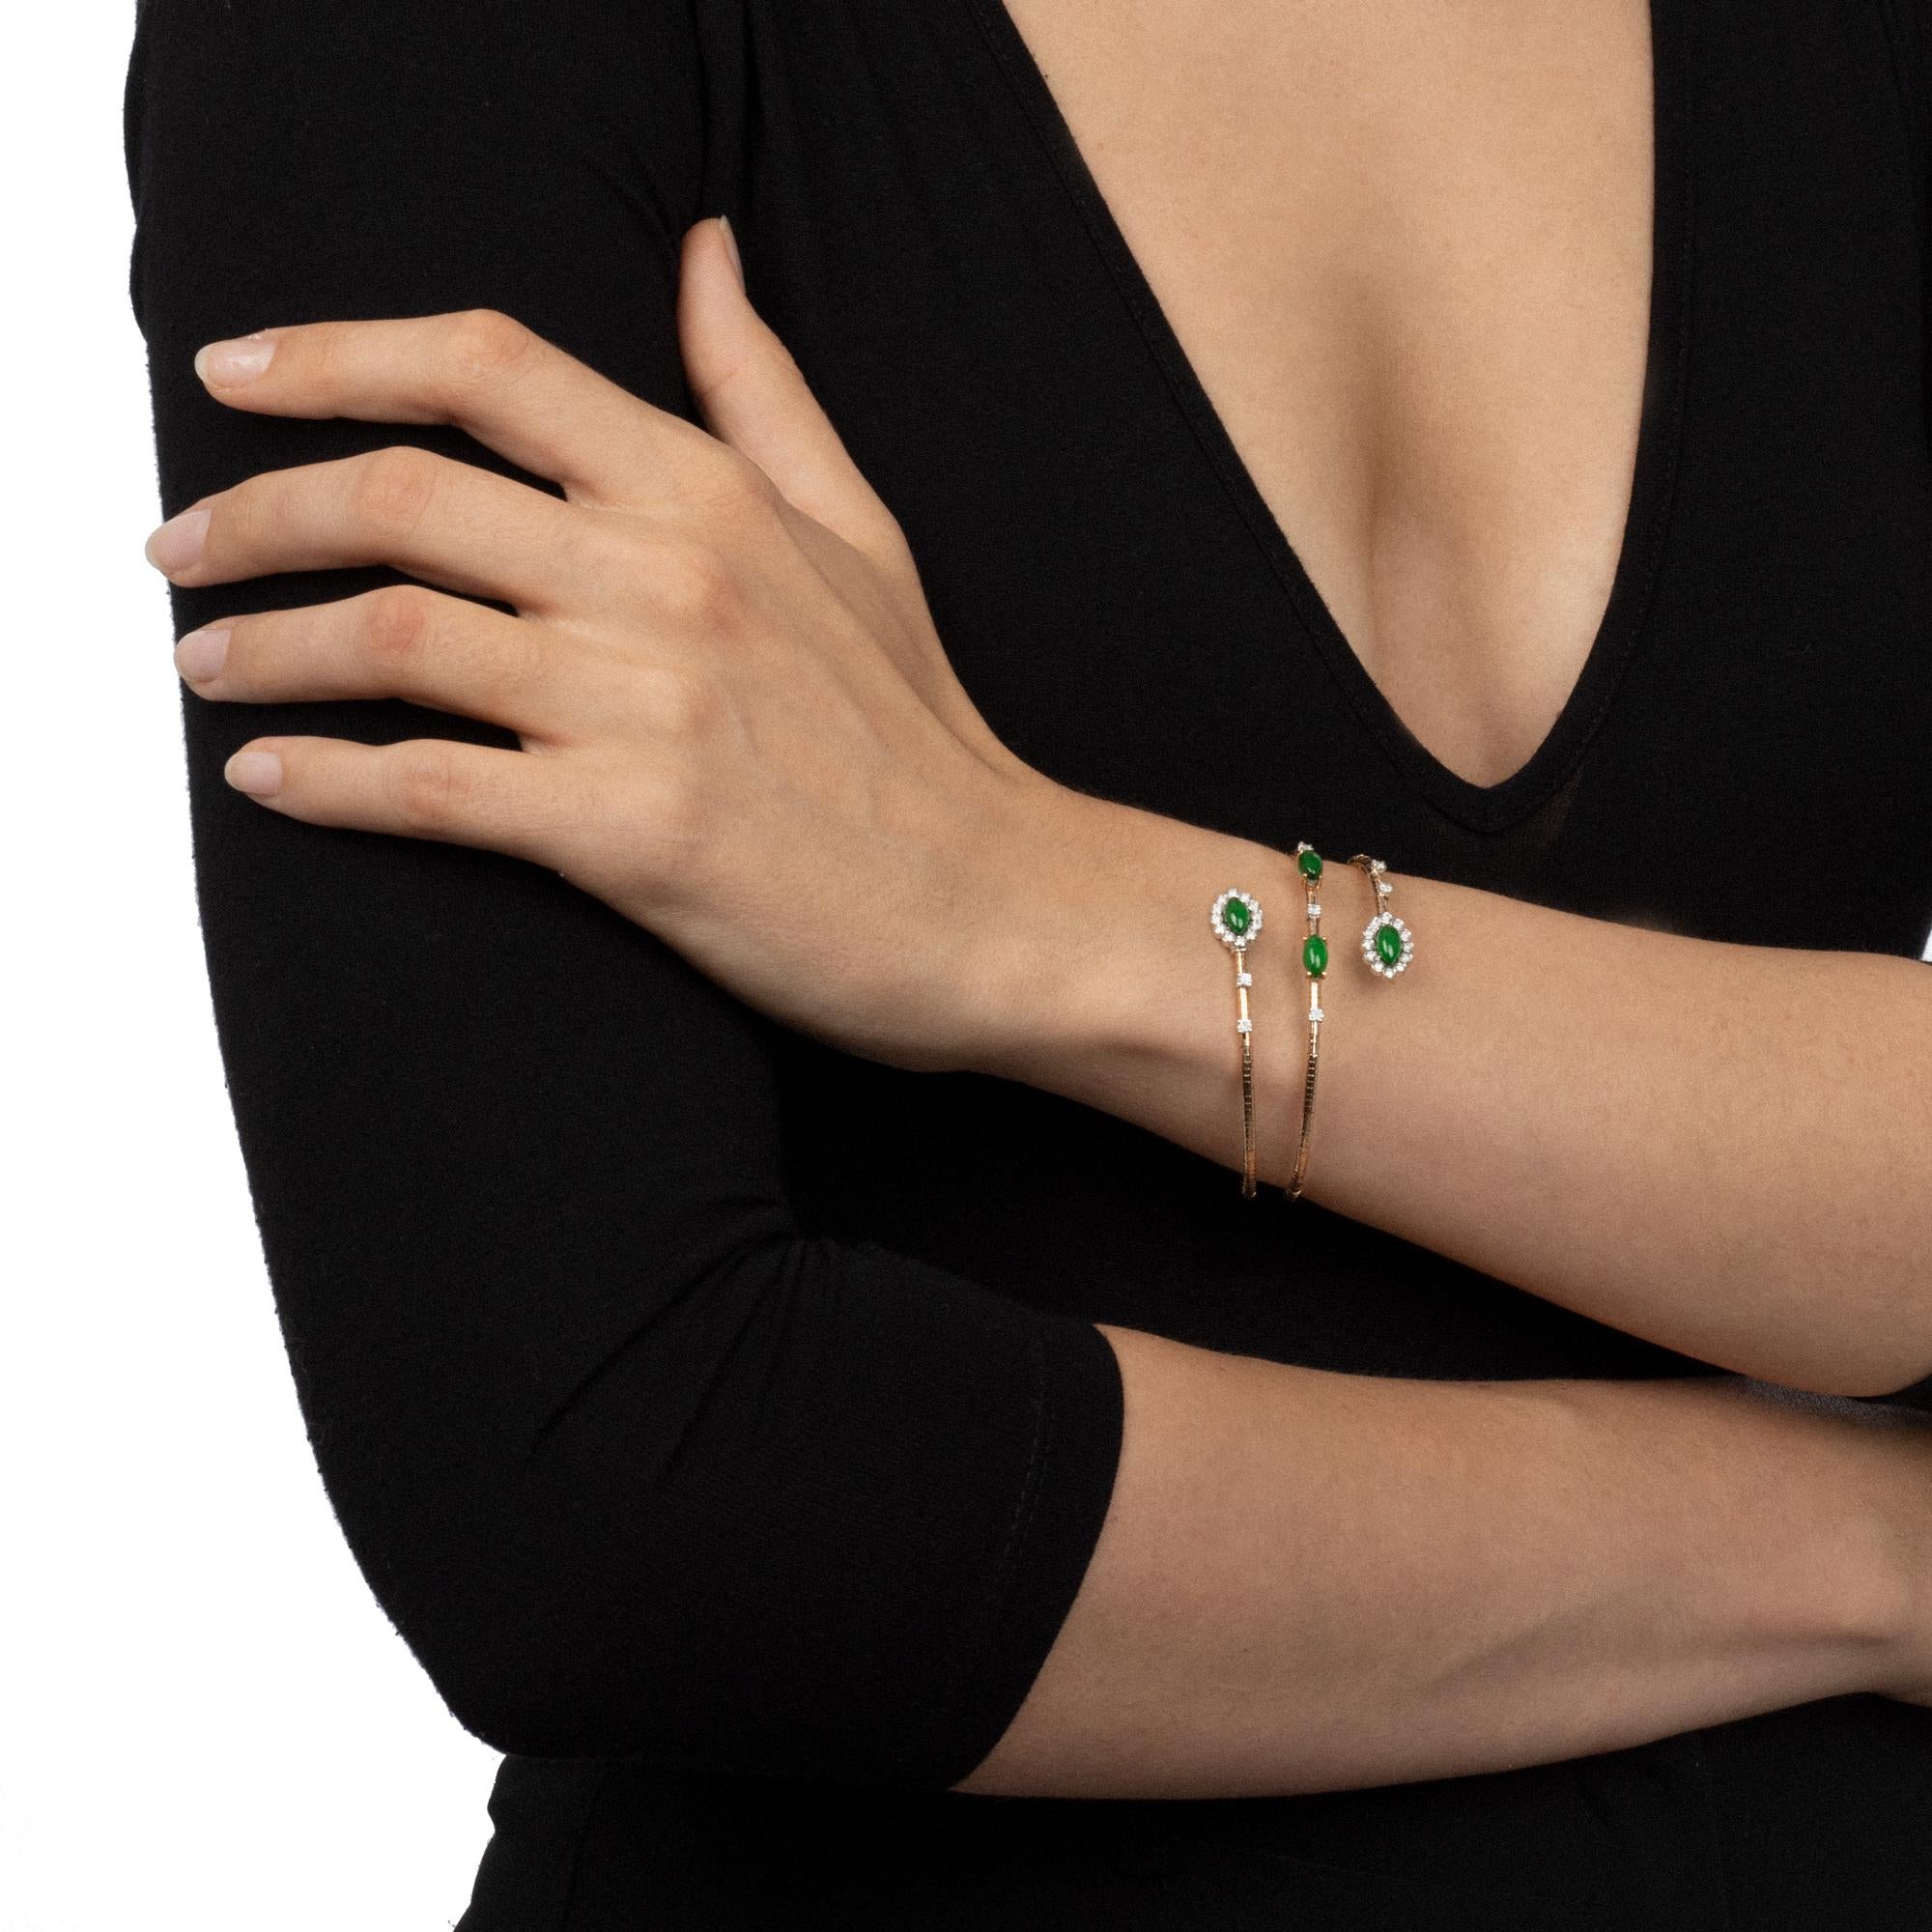 The spiral shape of this sophsiticated flex bracelet with a titanium core is designed to wrap gently around the wrist, catching and reflecting the light. The sophisticated elegance of the green aventurine gemstones is a celebration of italian